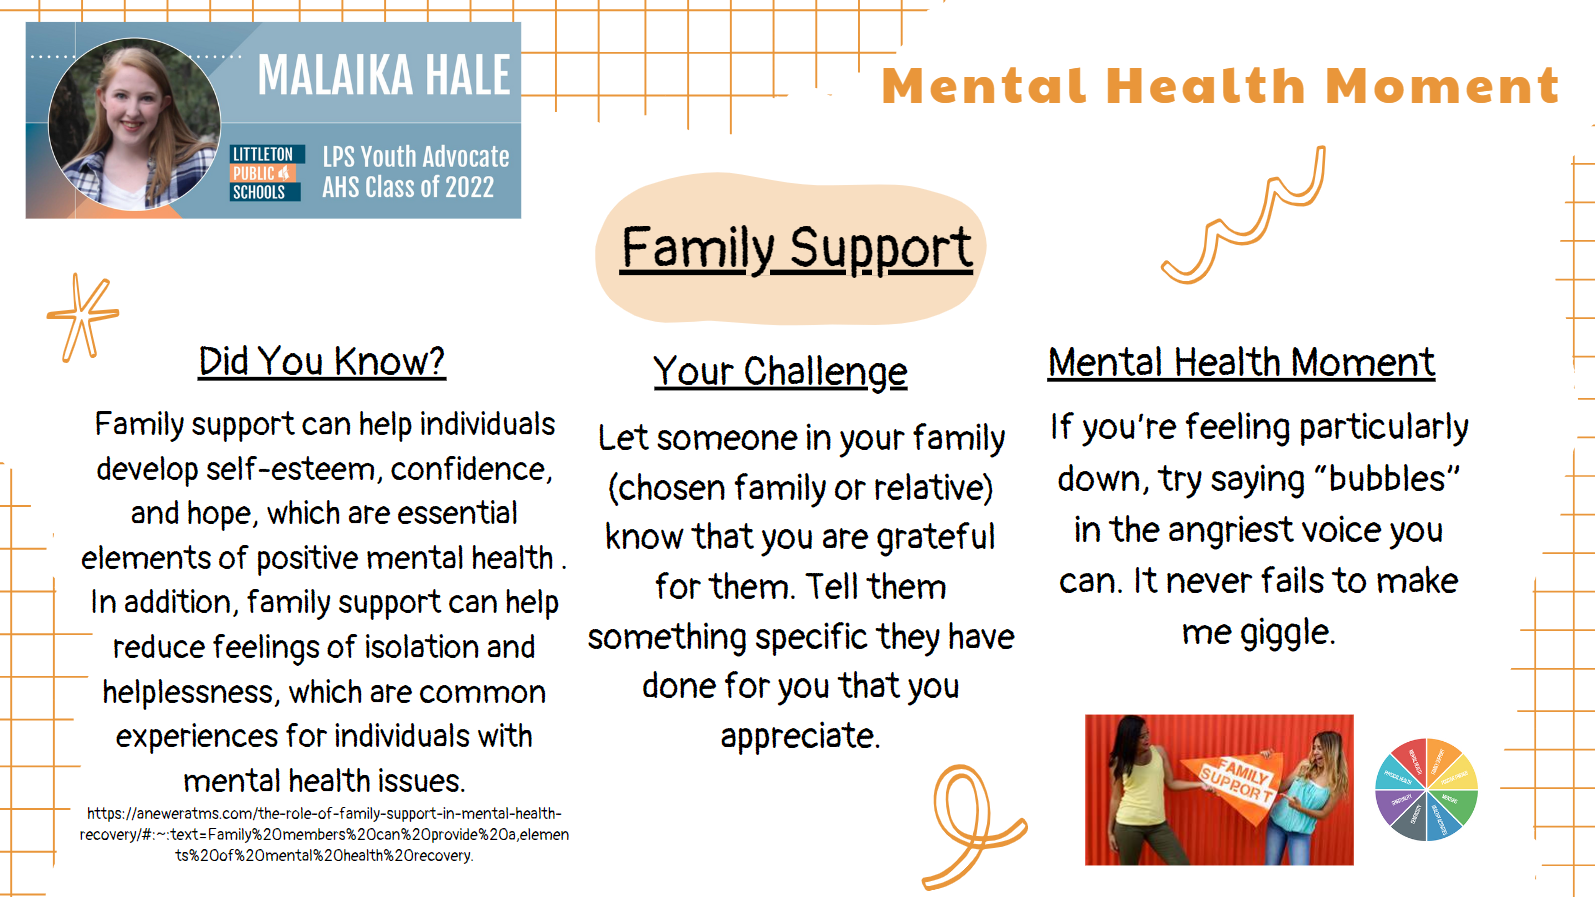 Mental Health Moments: Family Support - Malaika Hale LPS Youth Advocate AHS Class of 2022 (full text under the image)